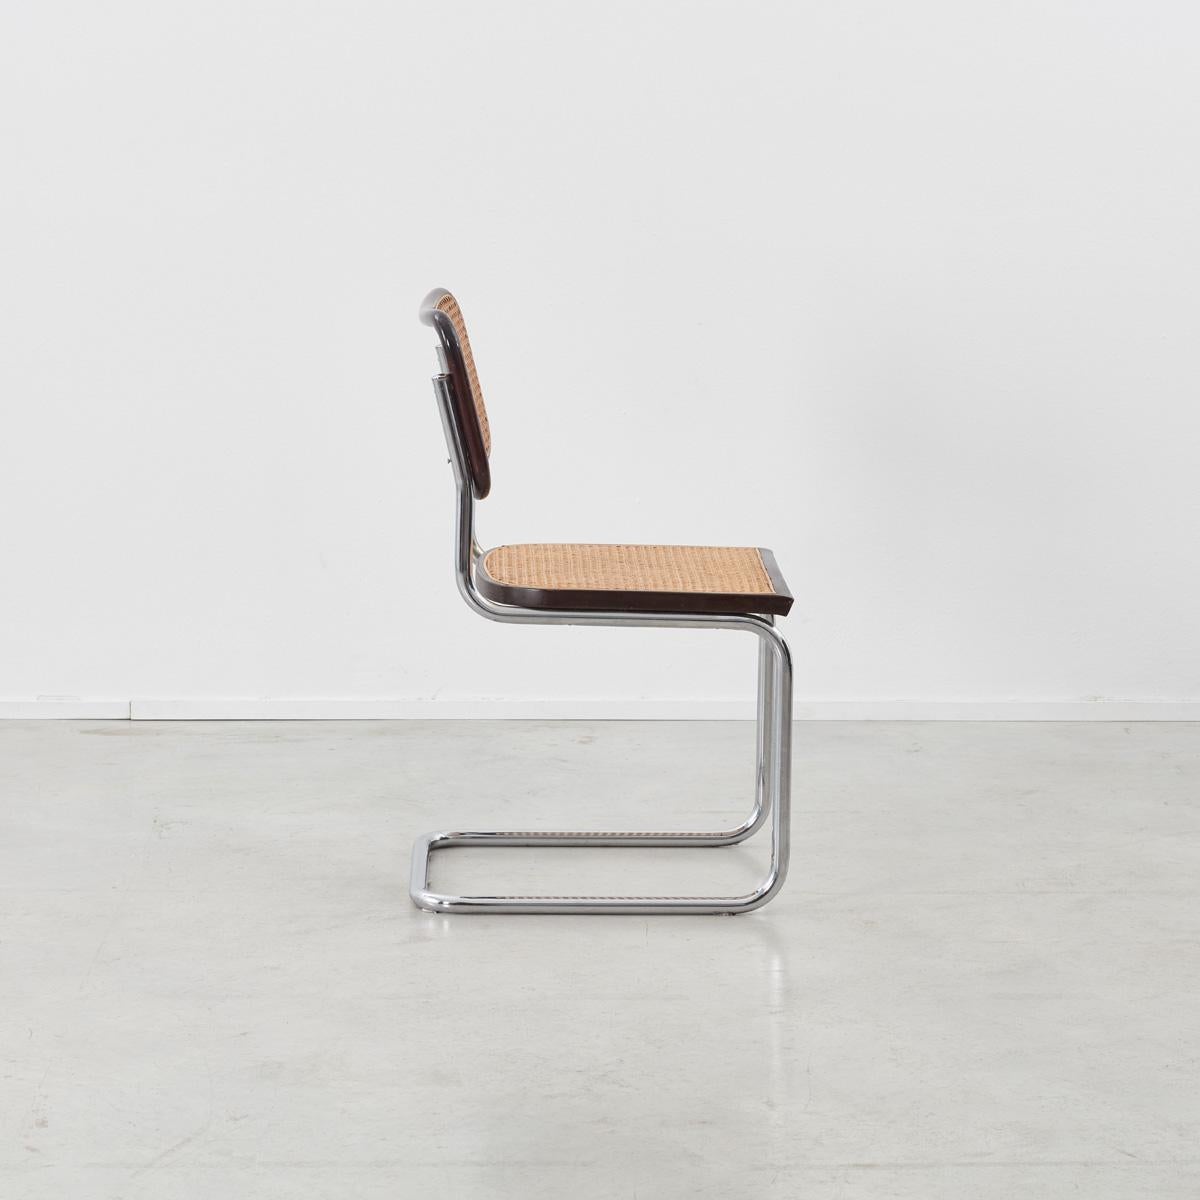 Designer and Architect Marcel Breuer (1902–1981) was an incredibly influential figure. When only 23 years of age, a talent at the Bauhaus, he pioneered the use of tubular steel in furniture manufacturing. Through this innovation he created several